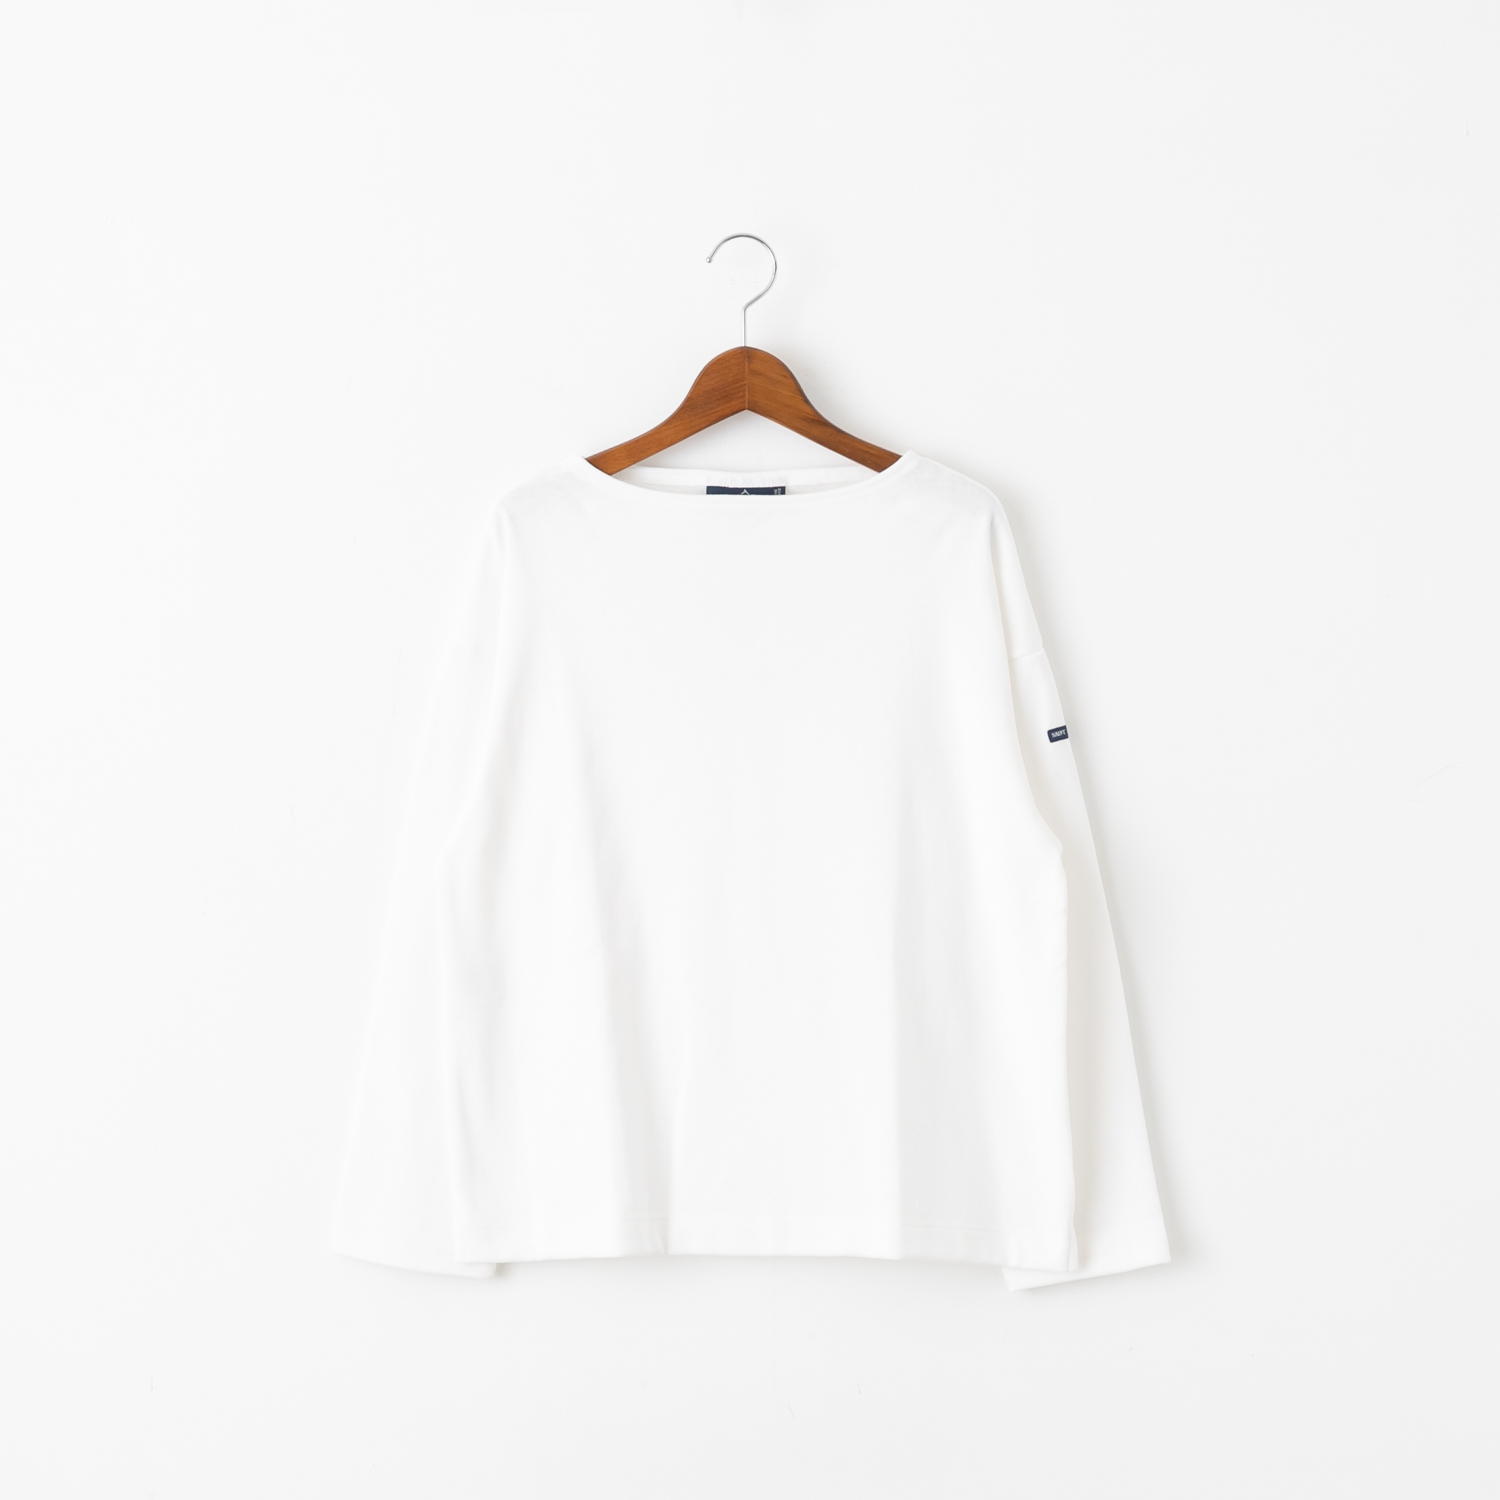 SAINT JAMES OUESSANT BORDER LOOSE ウェッソン1 - Tシャツ/カットソー